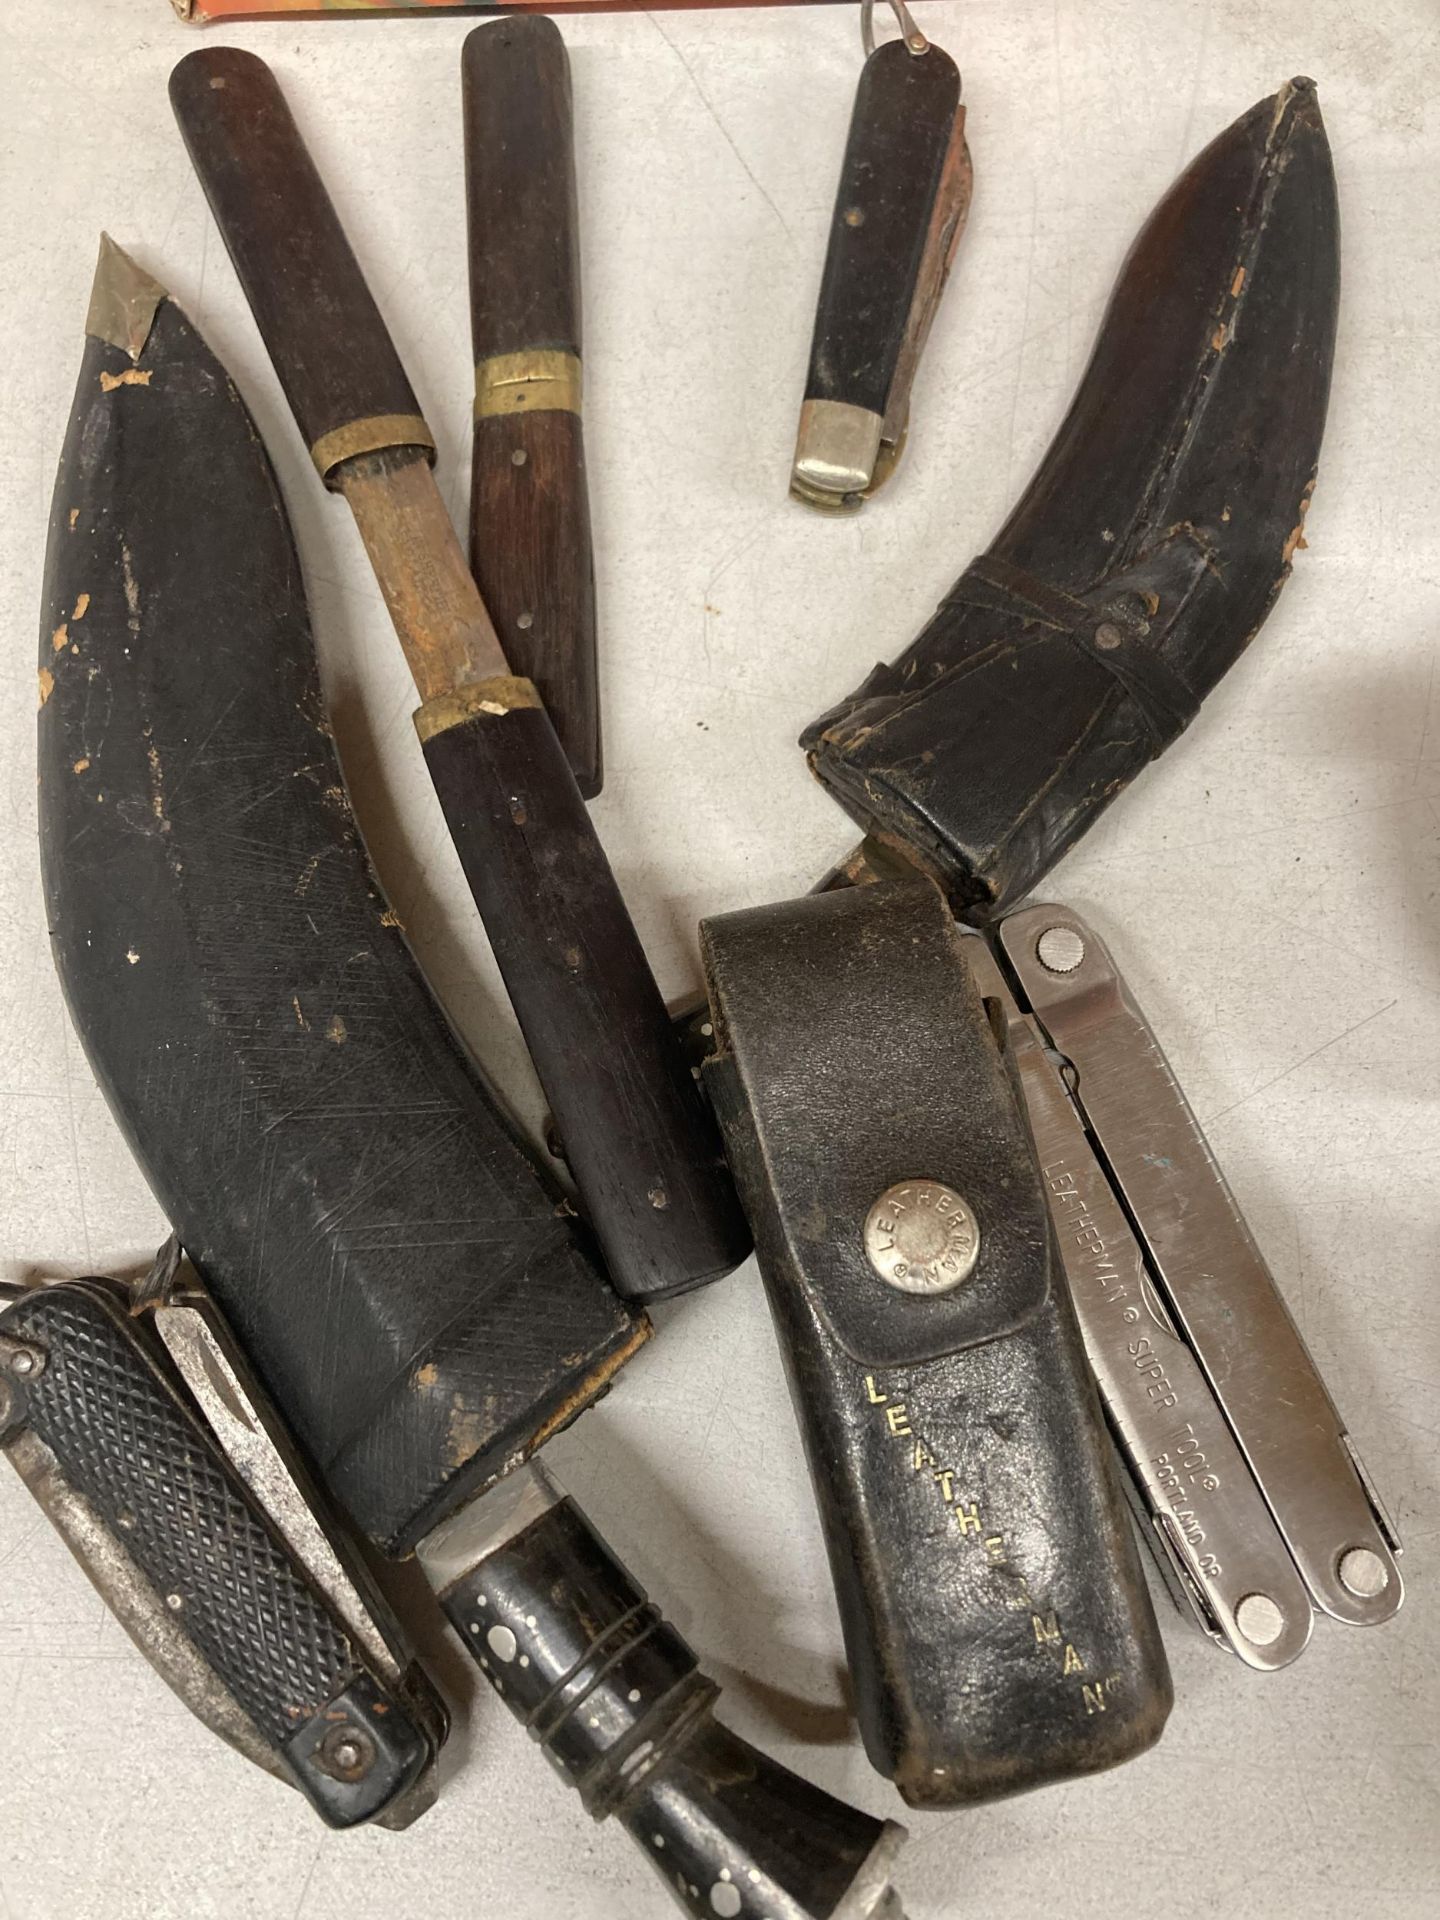 A COLLECTION OF KNIVES TO INCLUDE KUKRI STYLE, VINTAGE PENKNIVES, ETC - Image 2 of 3